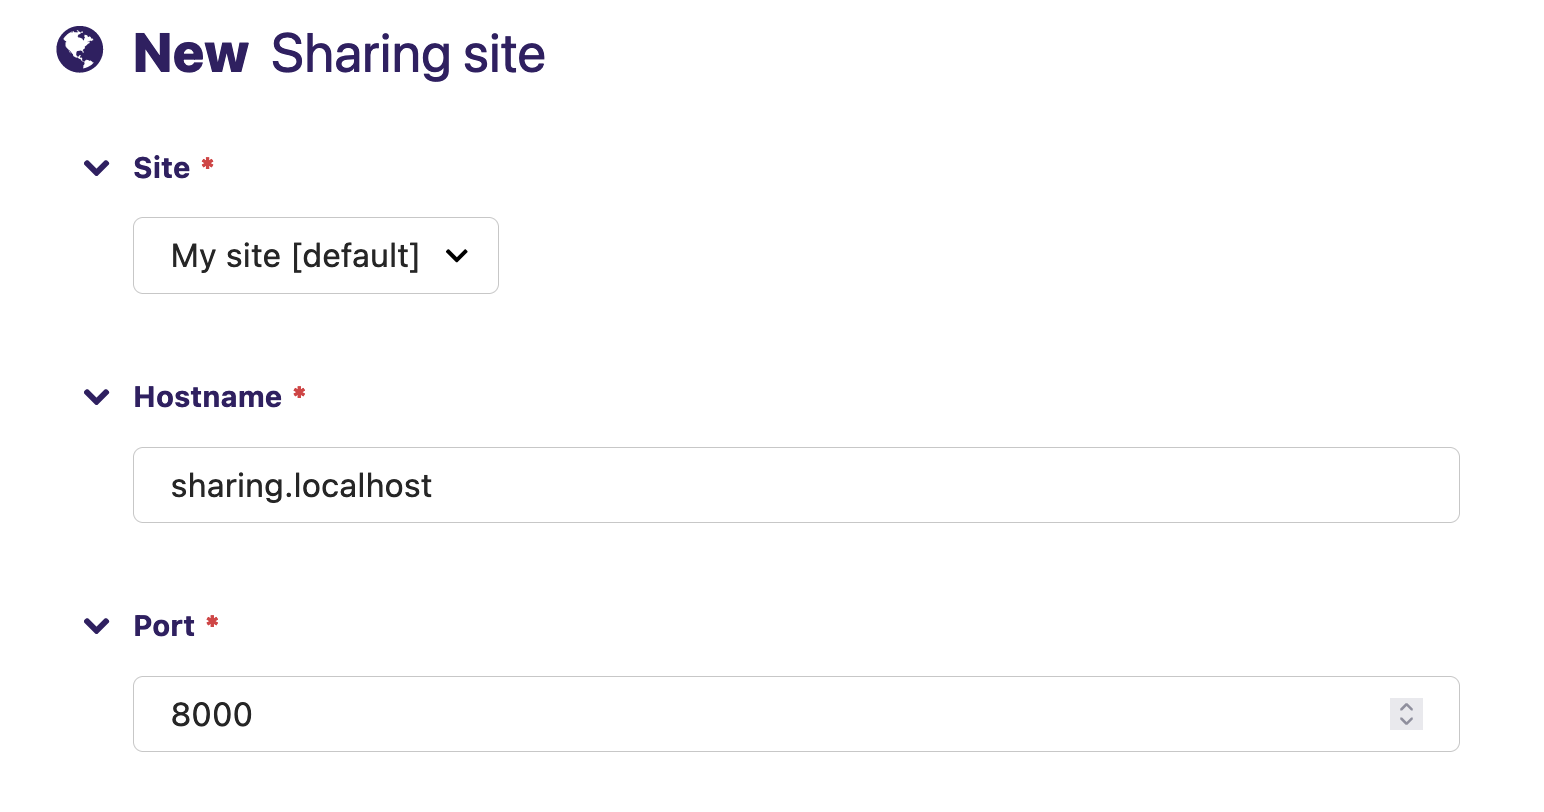 New sharing site with site: "localhost [default]", hostname: "sharing.localhost", port: "8000"